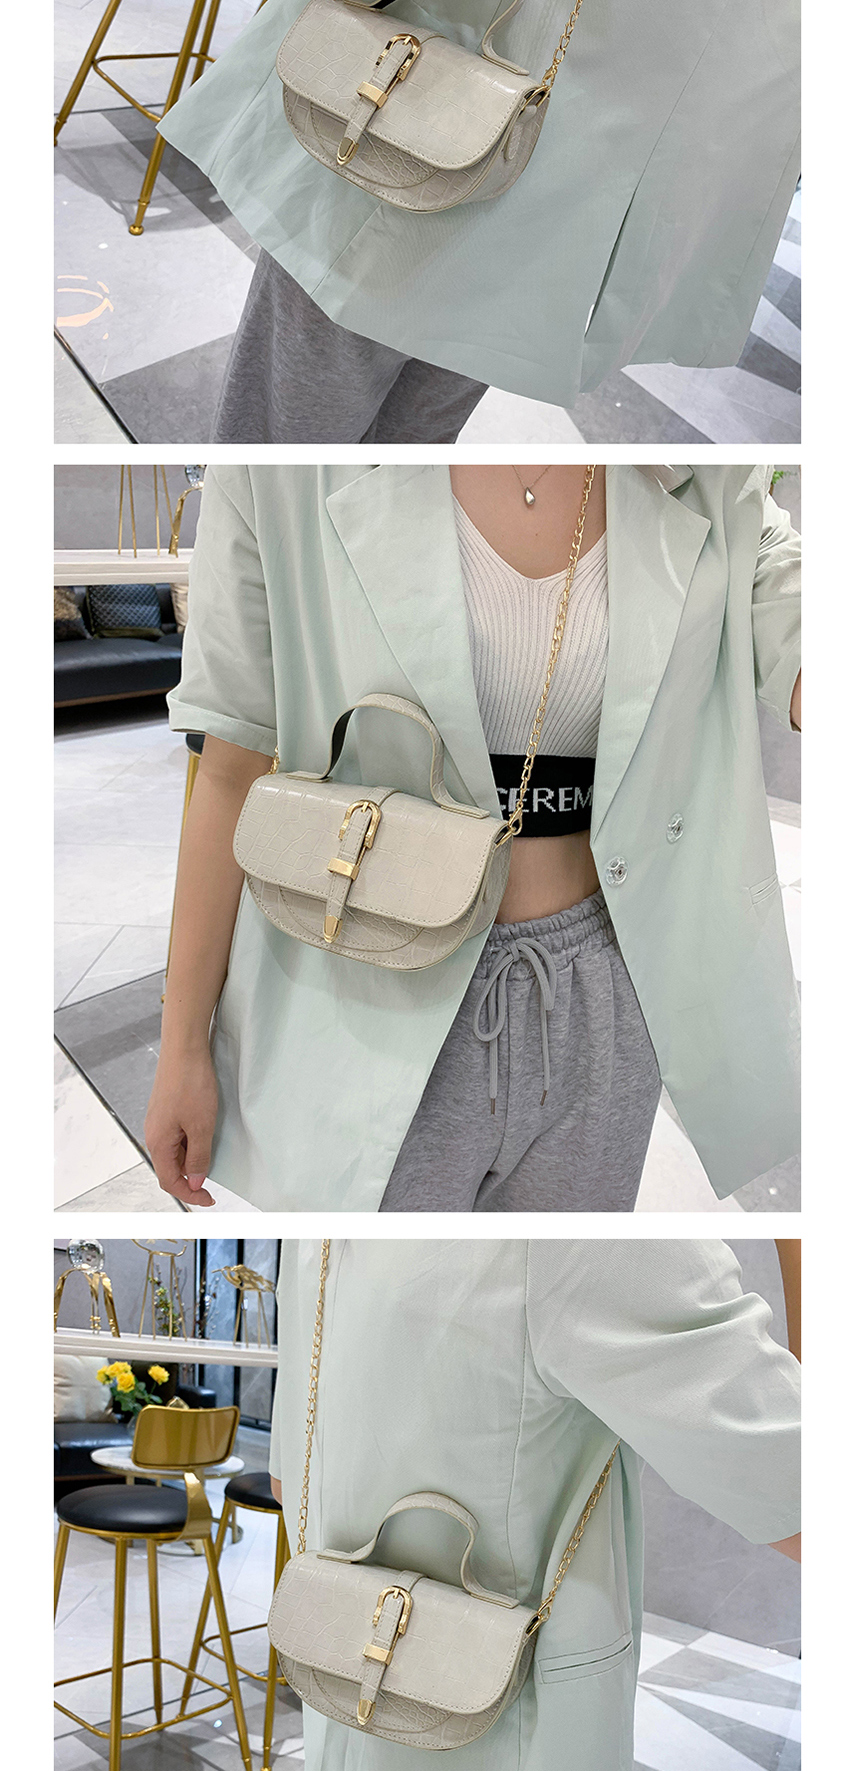 Fashion White Chain Shoulder Bag With Crocodile Pattern Buckle,Shoulder bags